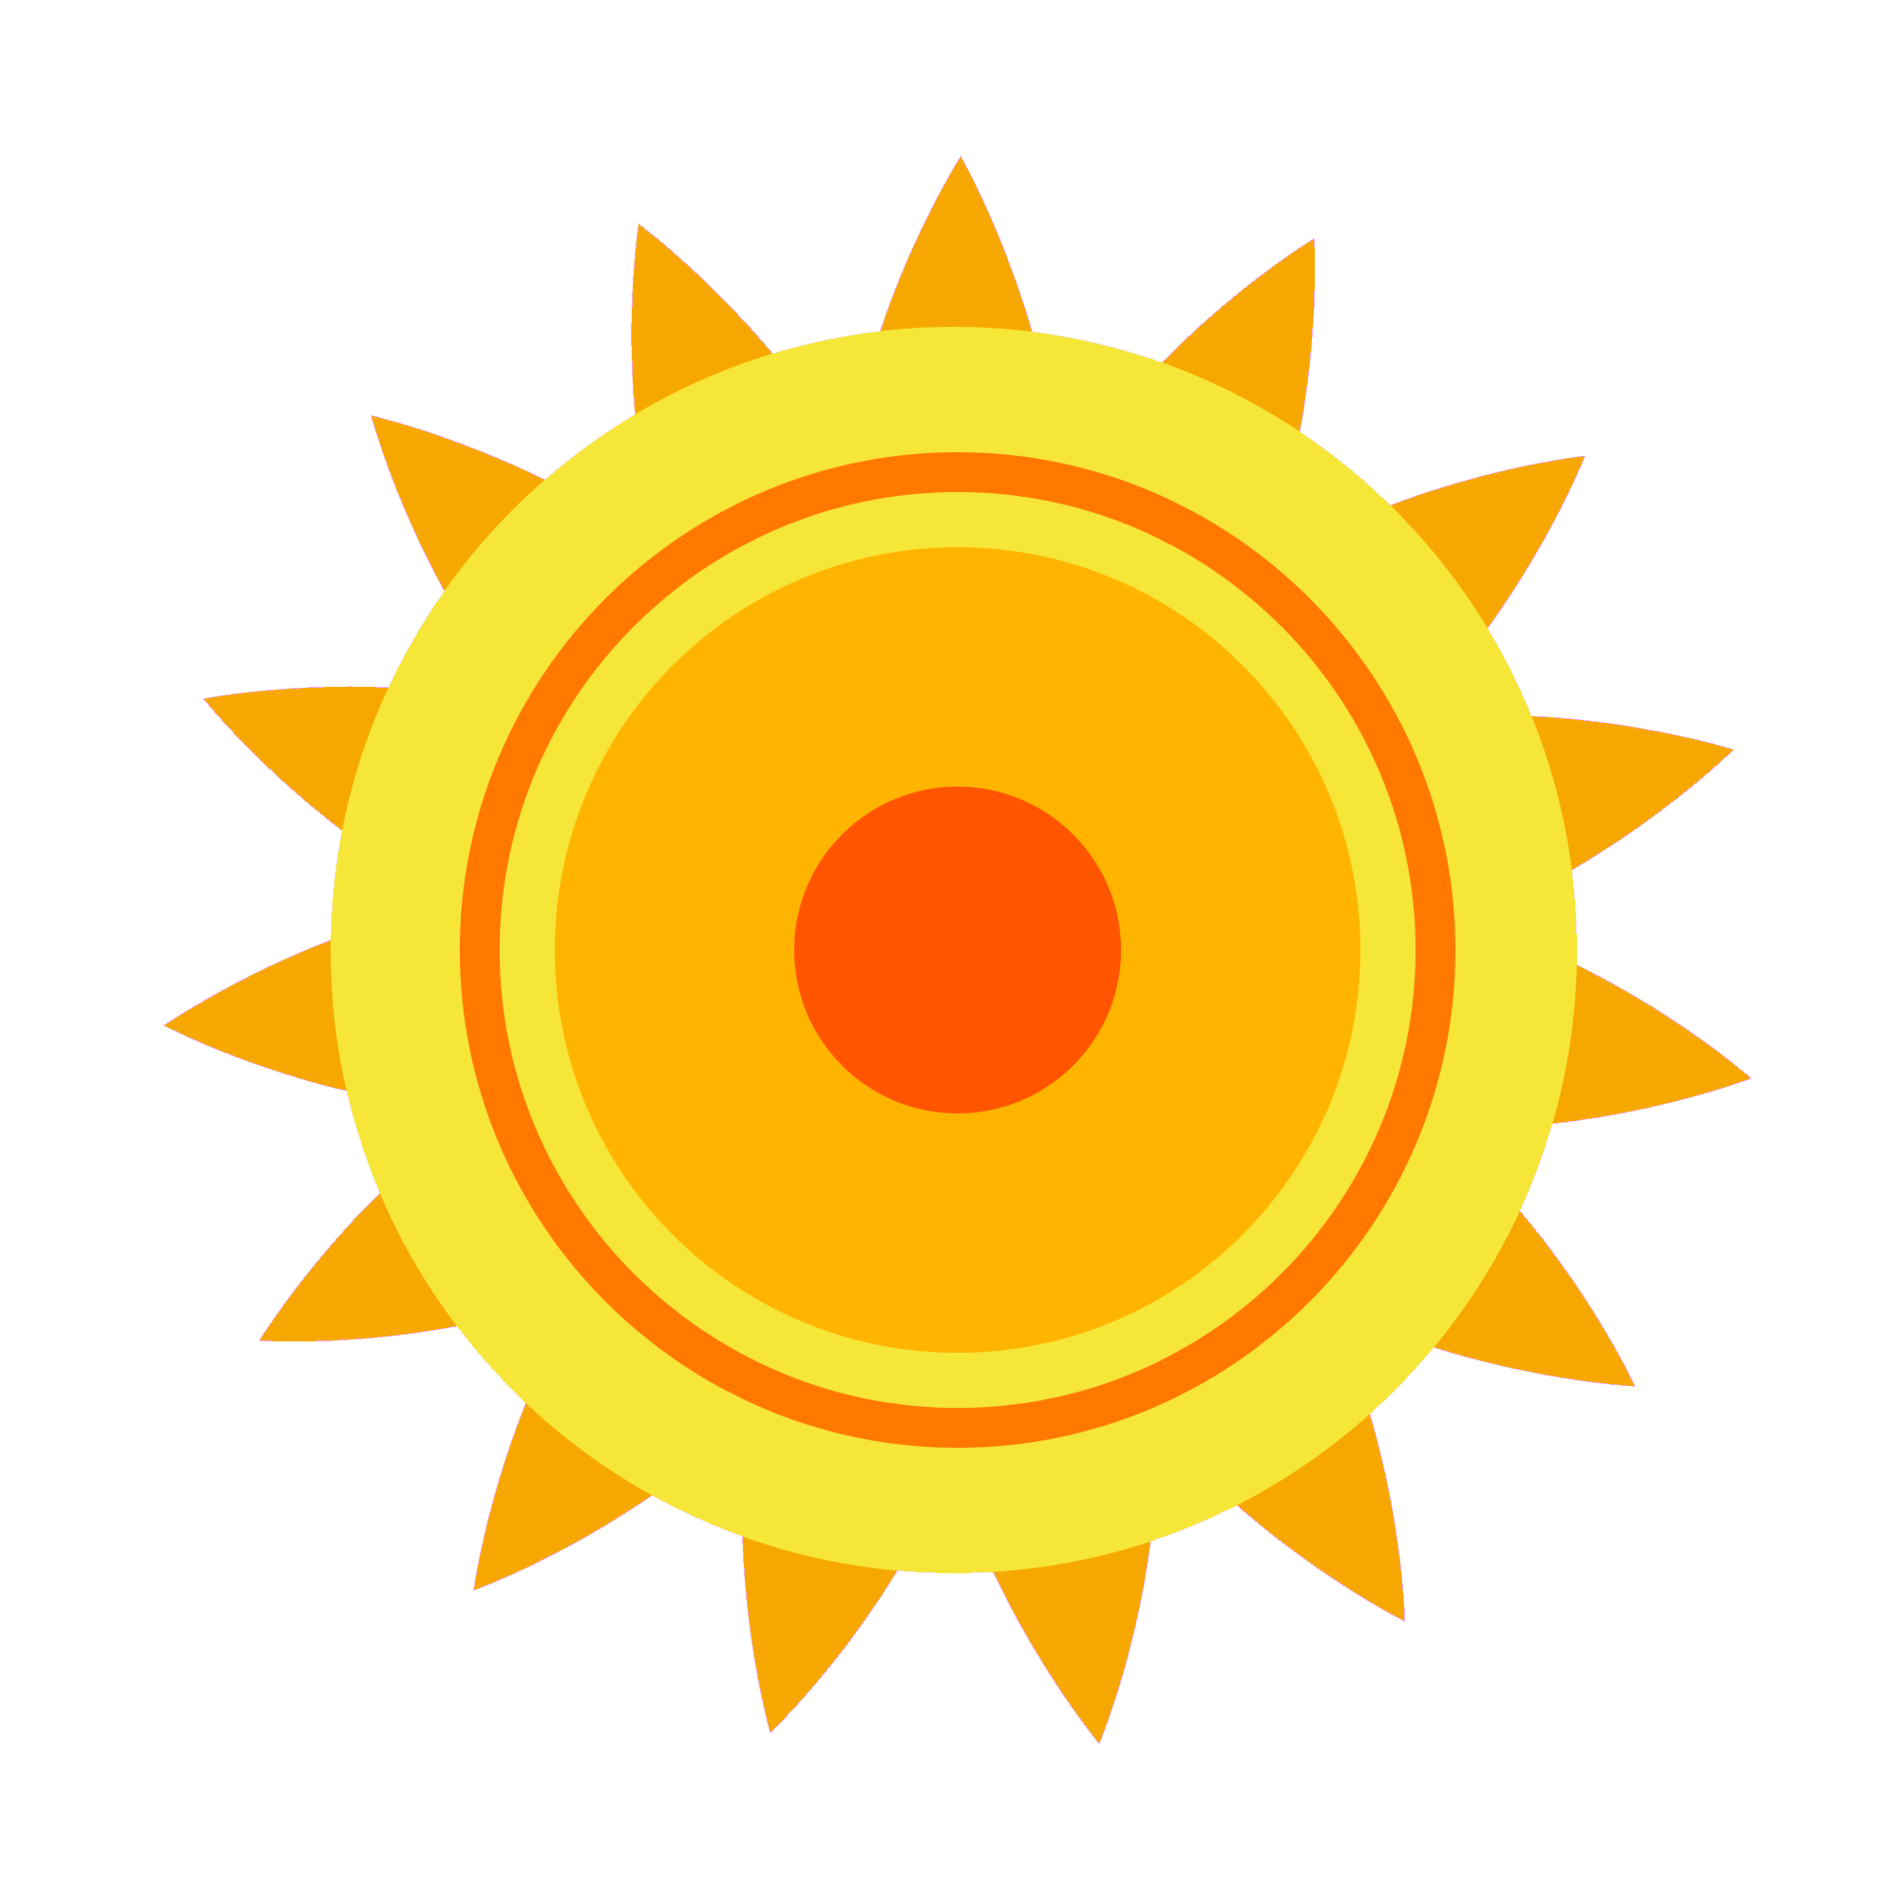 Animated Sun Images Clipart - Free to use Clip Art Resource